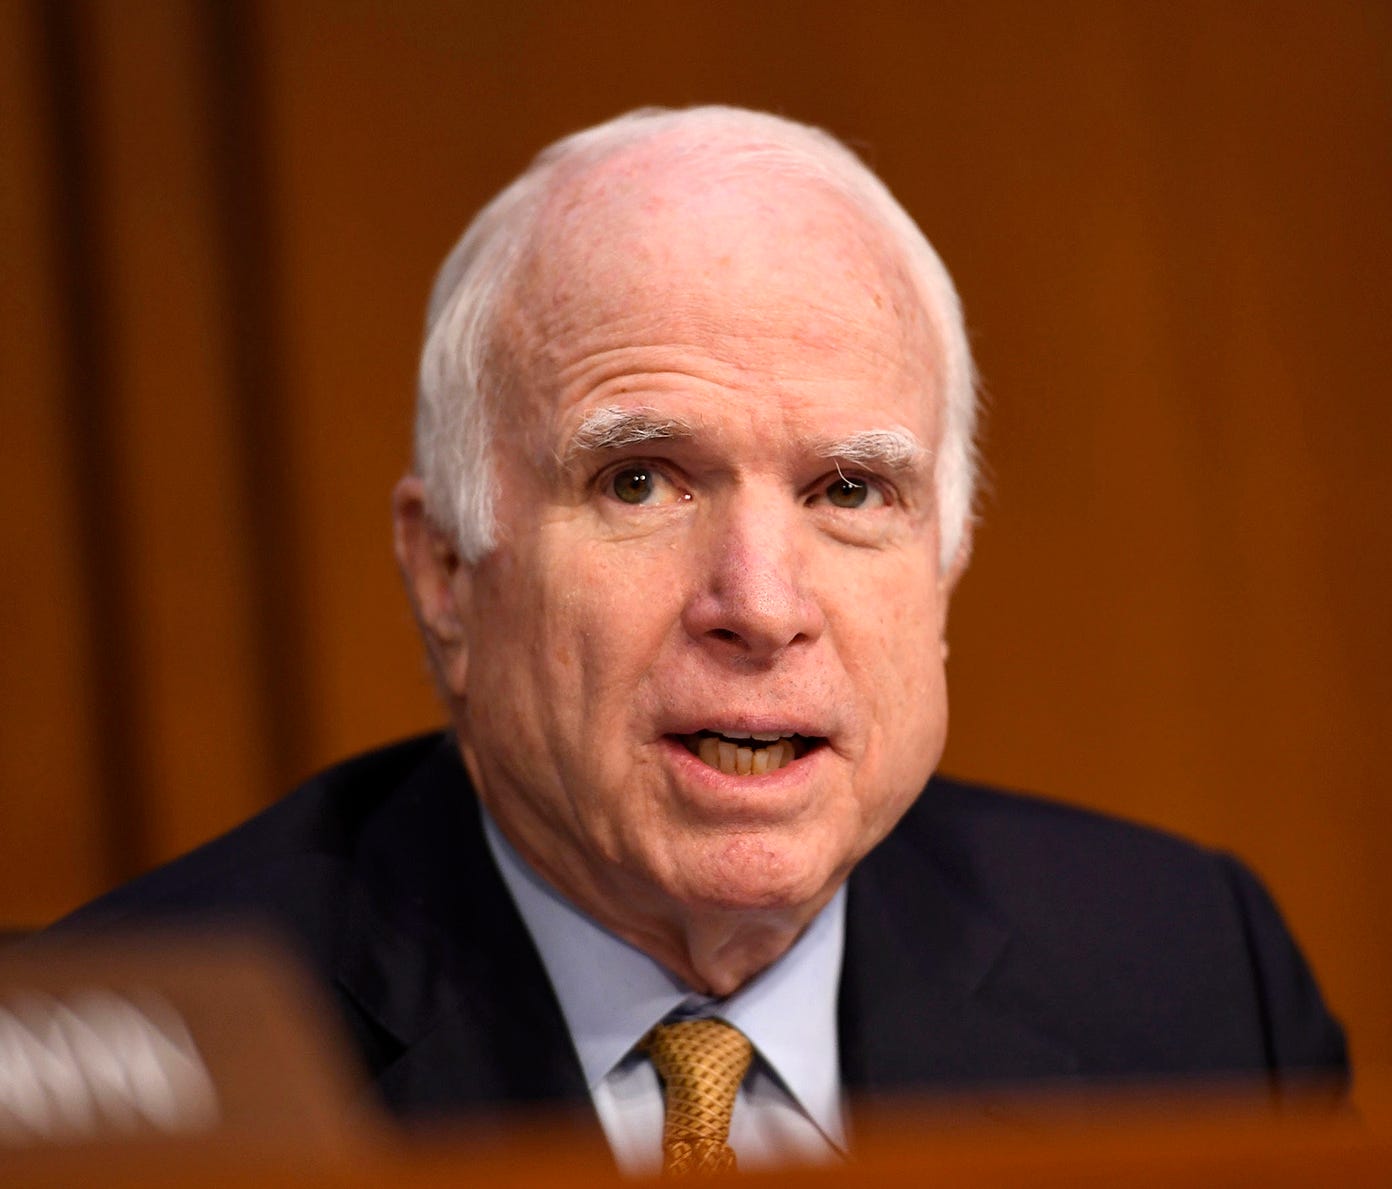 Sen. John McCain, R-Ariz., speaks as former FBI director James Comey testifies in front of the Senate Intelligence Committee in Washington on June 8, 2017. Medical reports about the nature of a blood clot removed from above McCain's eye could answer 